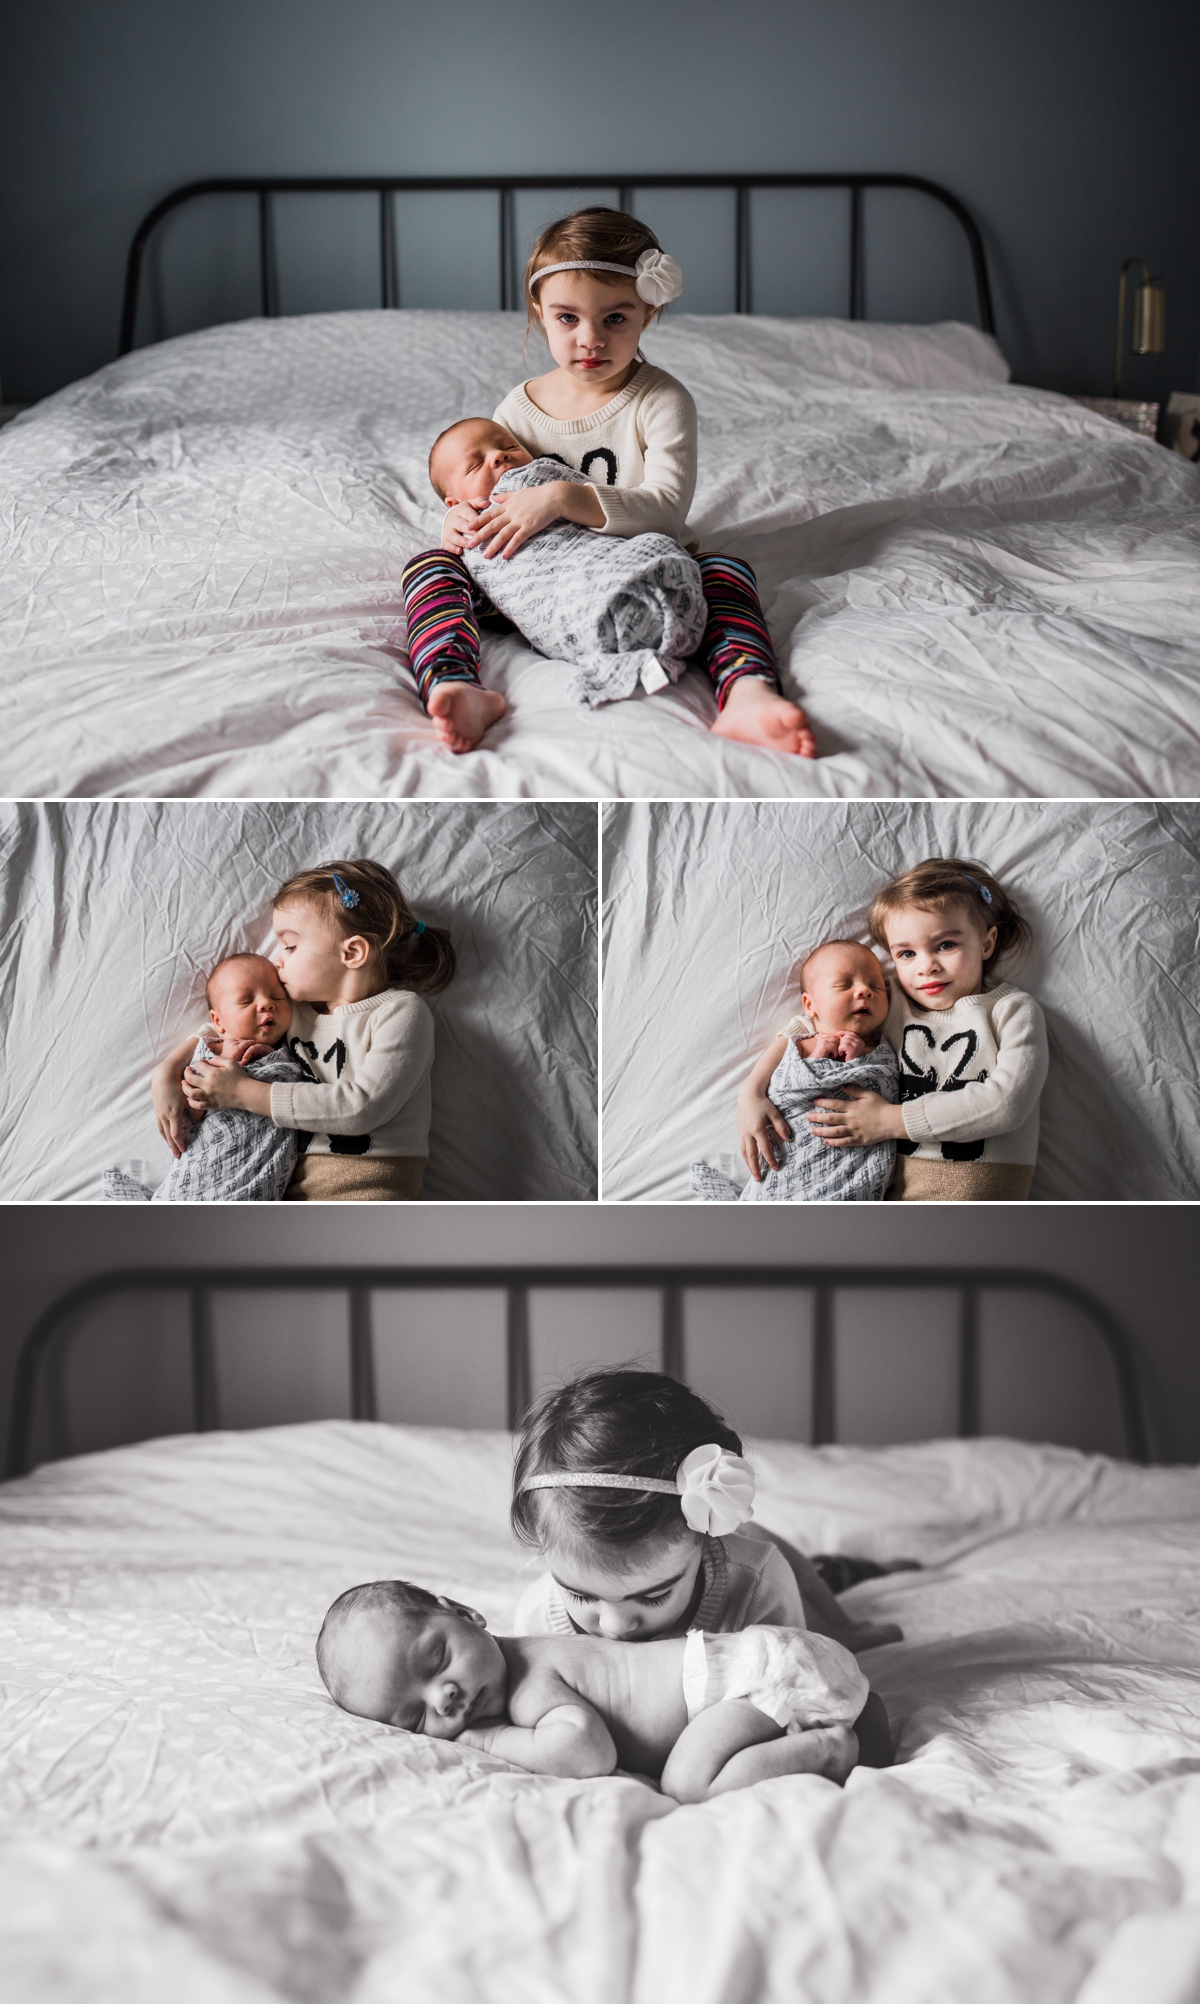 elena s blair newborn photography | seattle home lifestyle family photograper | on location in beautiful light filled home with the baby